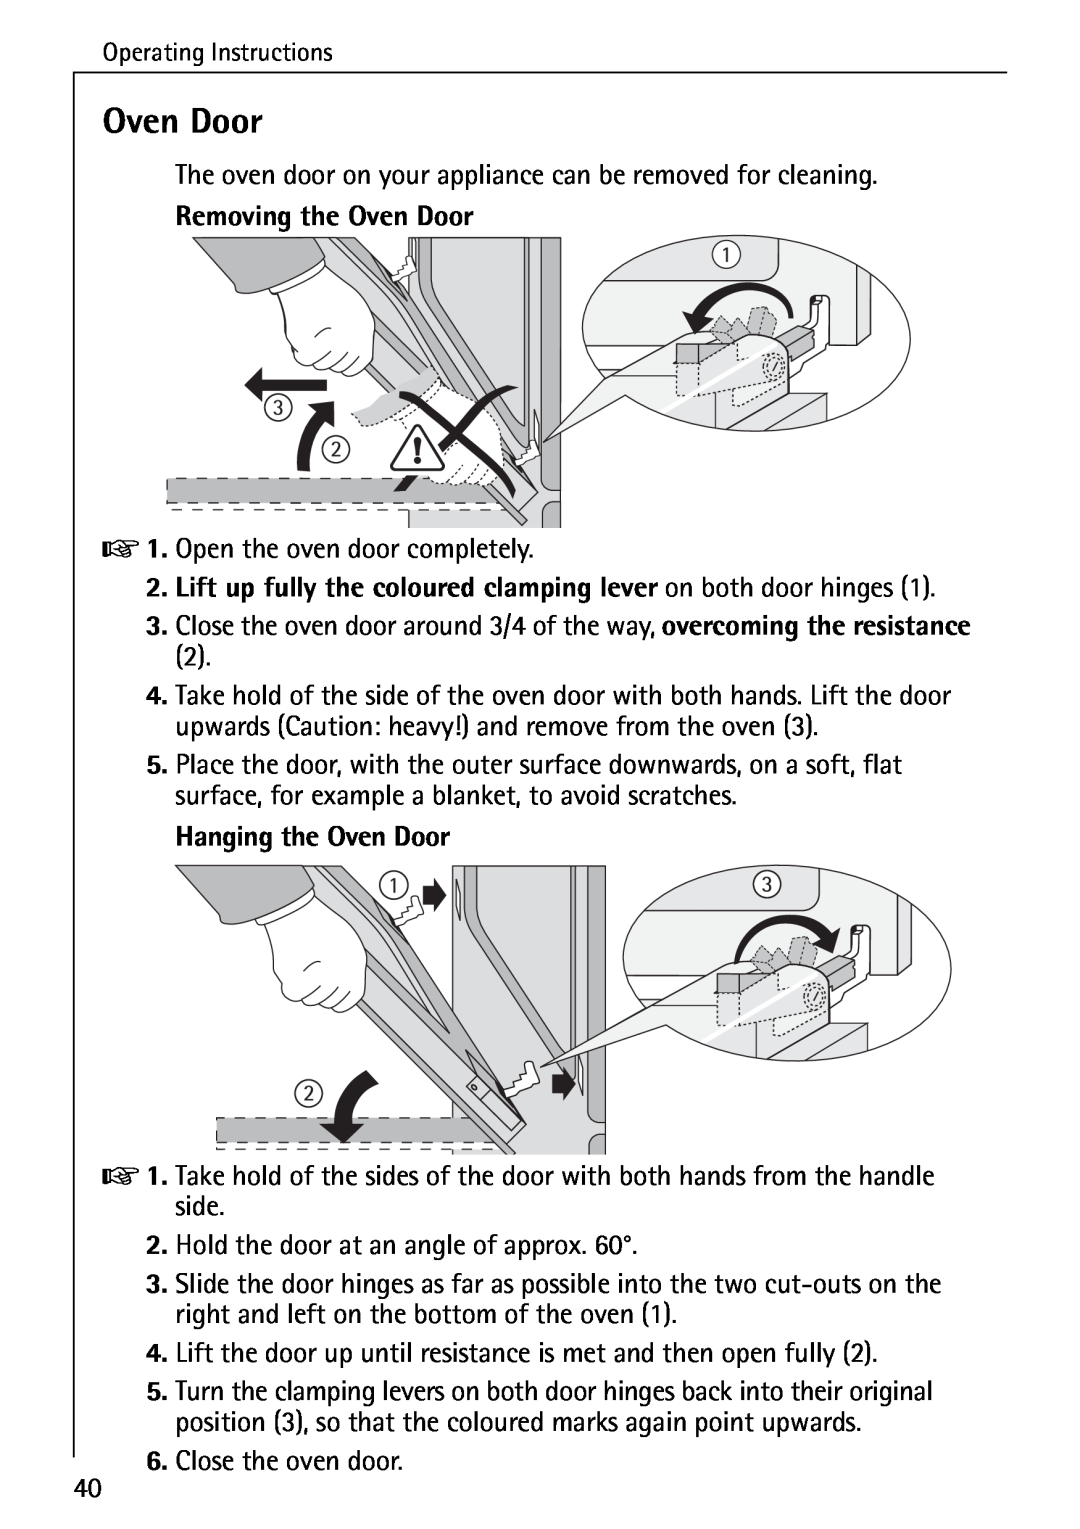 AEG 5033 V operating instructions Removing the Oven Door, Lift up fully the coloured clamping lever on both door hinges 